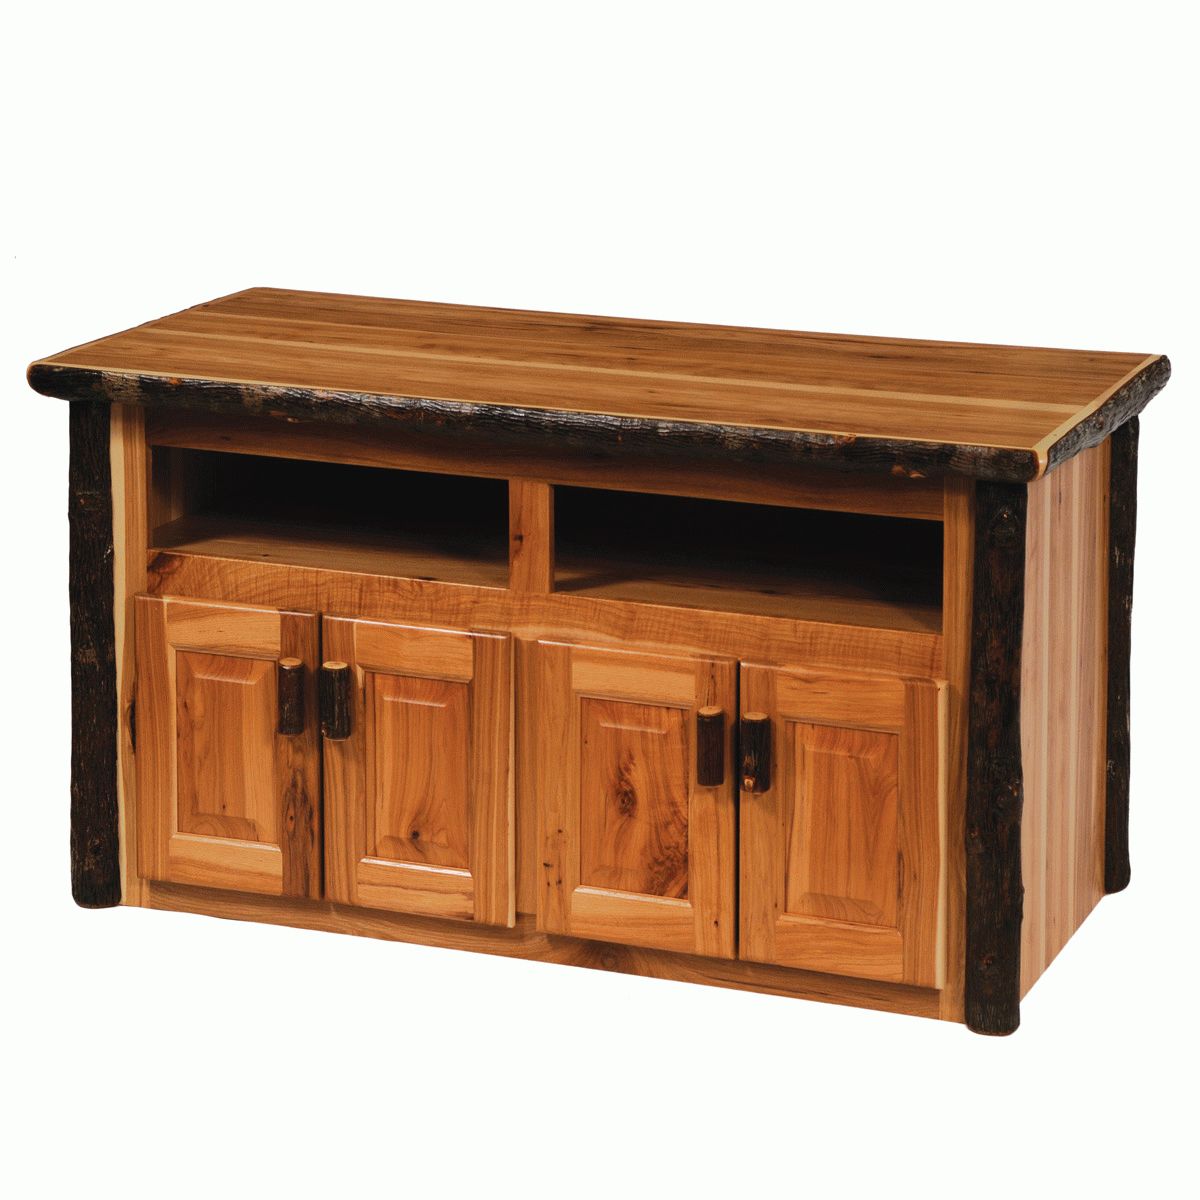 Rustic Tv Stands: Hickory Widescreen Tv Stand Within Jackson Wide Tv Stands (Gallery 20 of 20)